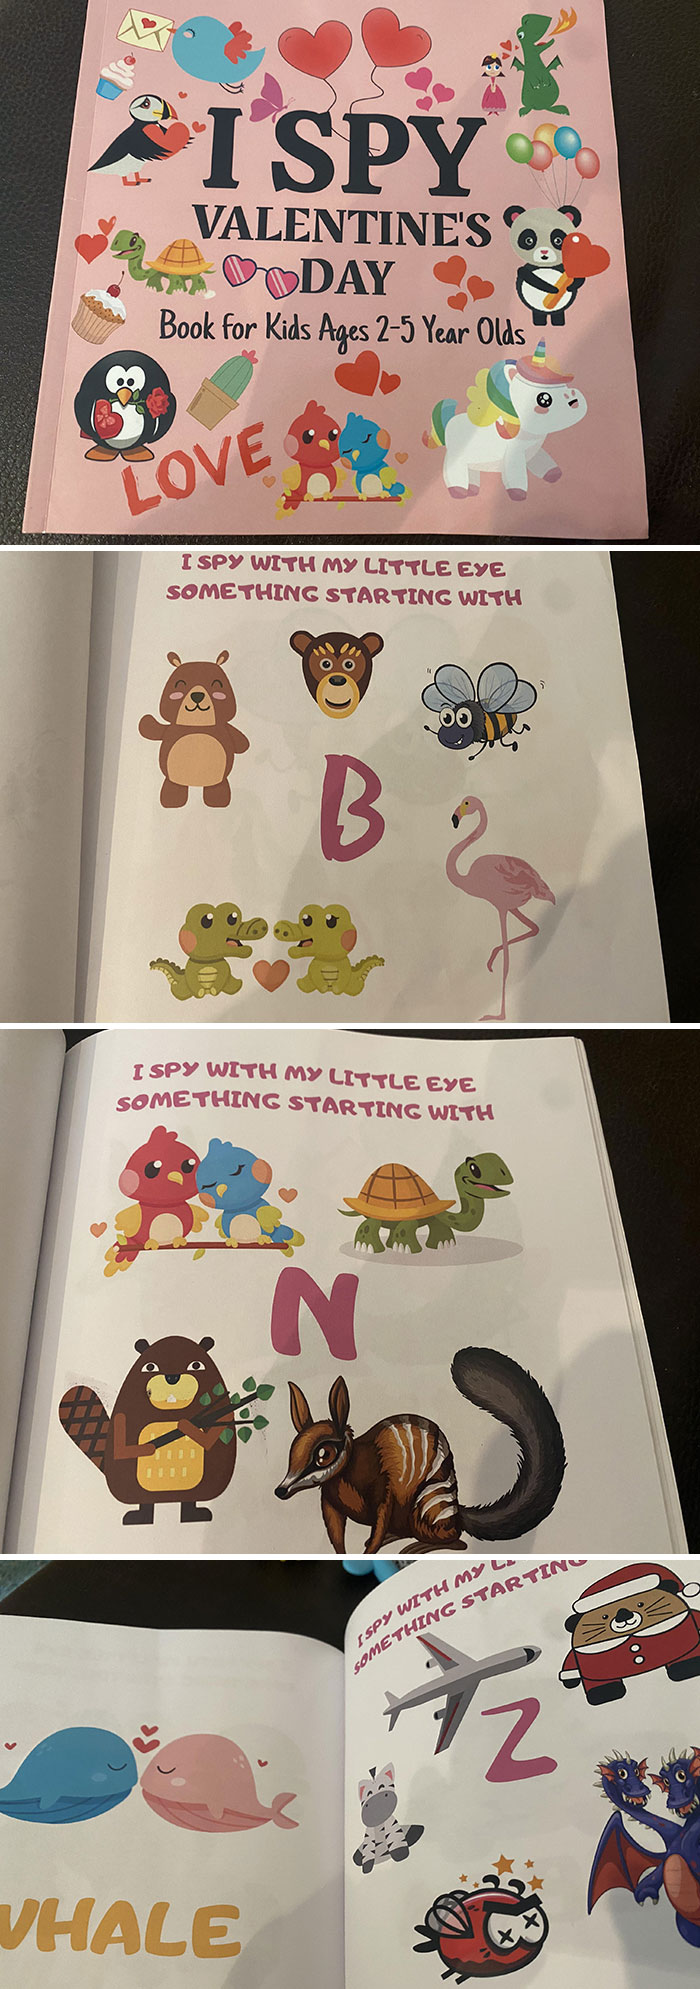 This Book My Mother-In-Law Bought For My Toddler Last Valentine’s Day